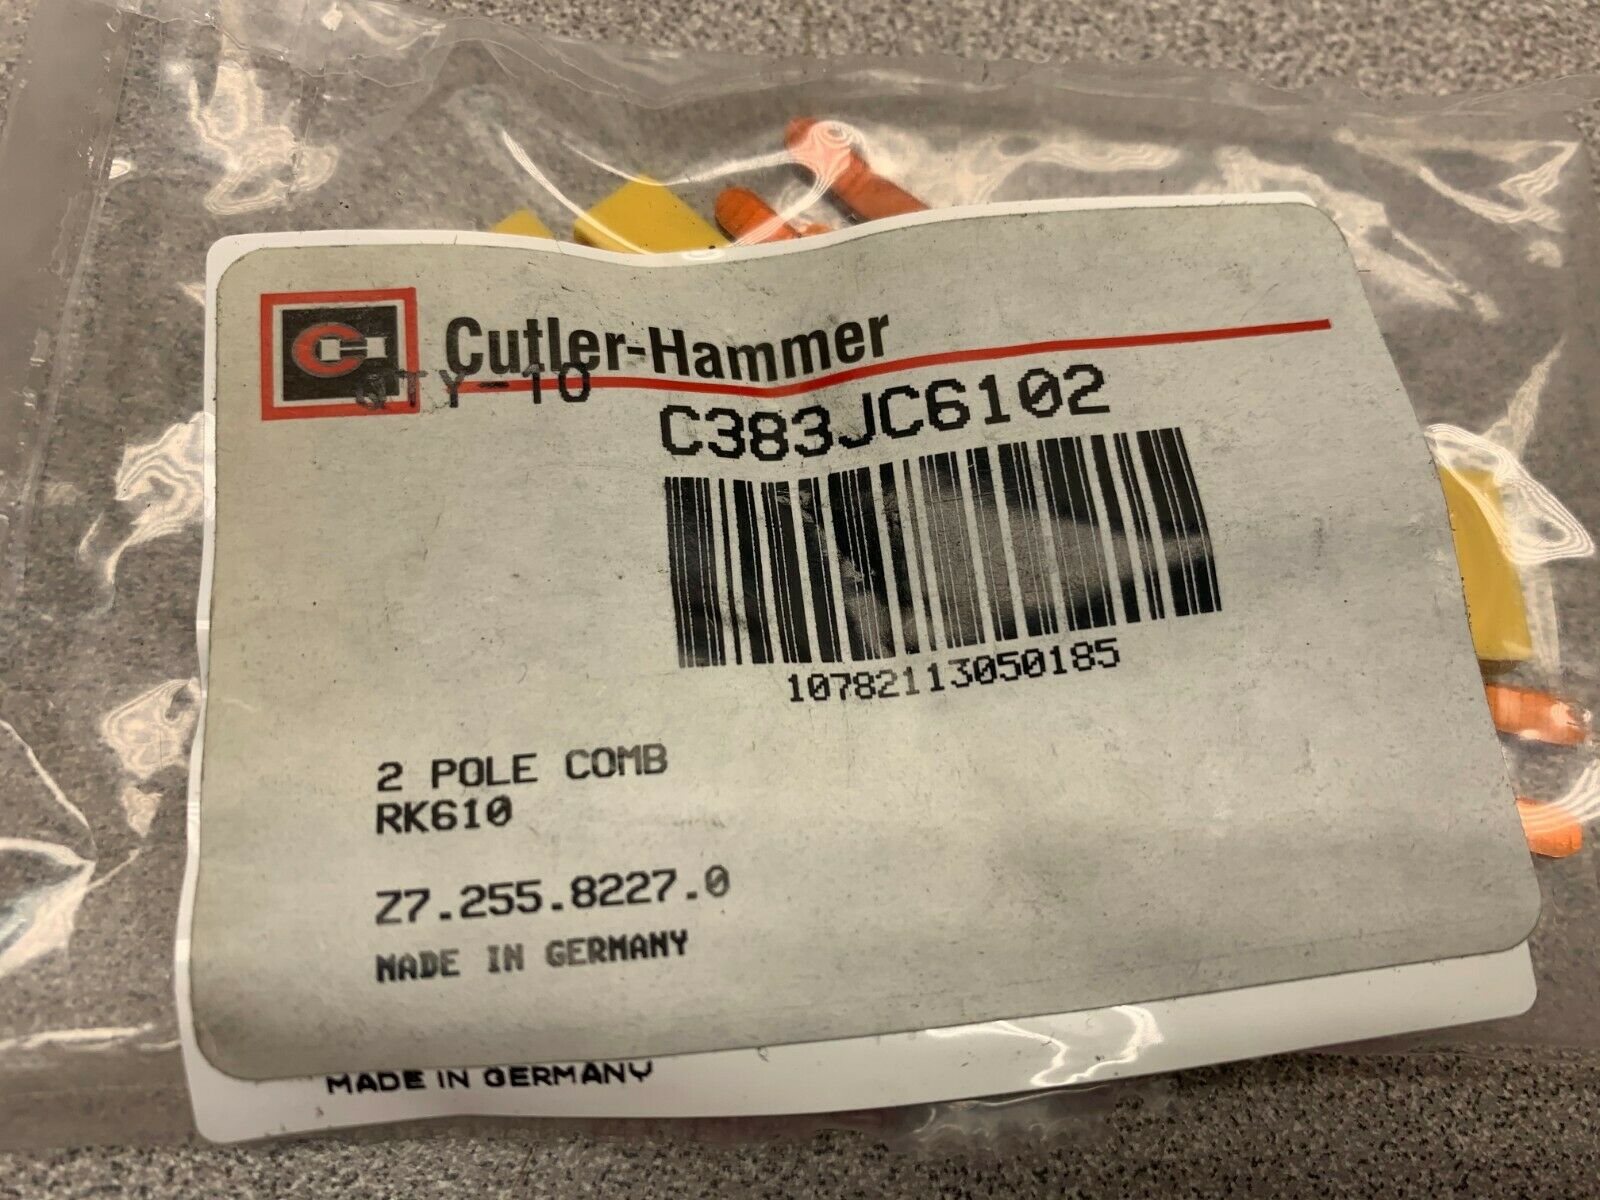 BAG OF 10 NEW IN BAG CUTLER HAMMER 2 POLE COMB C383JC6102